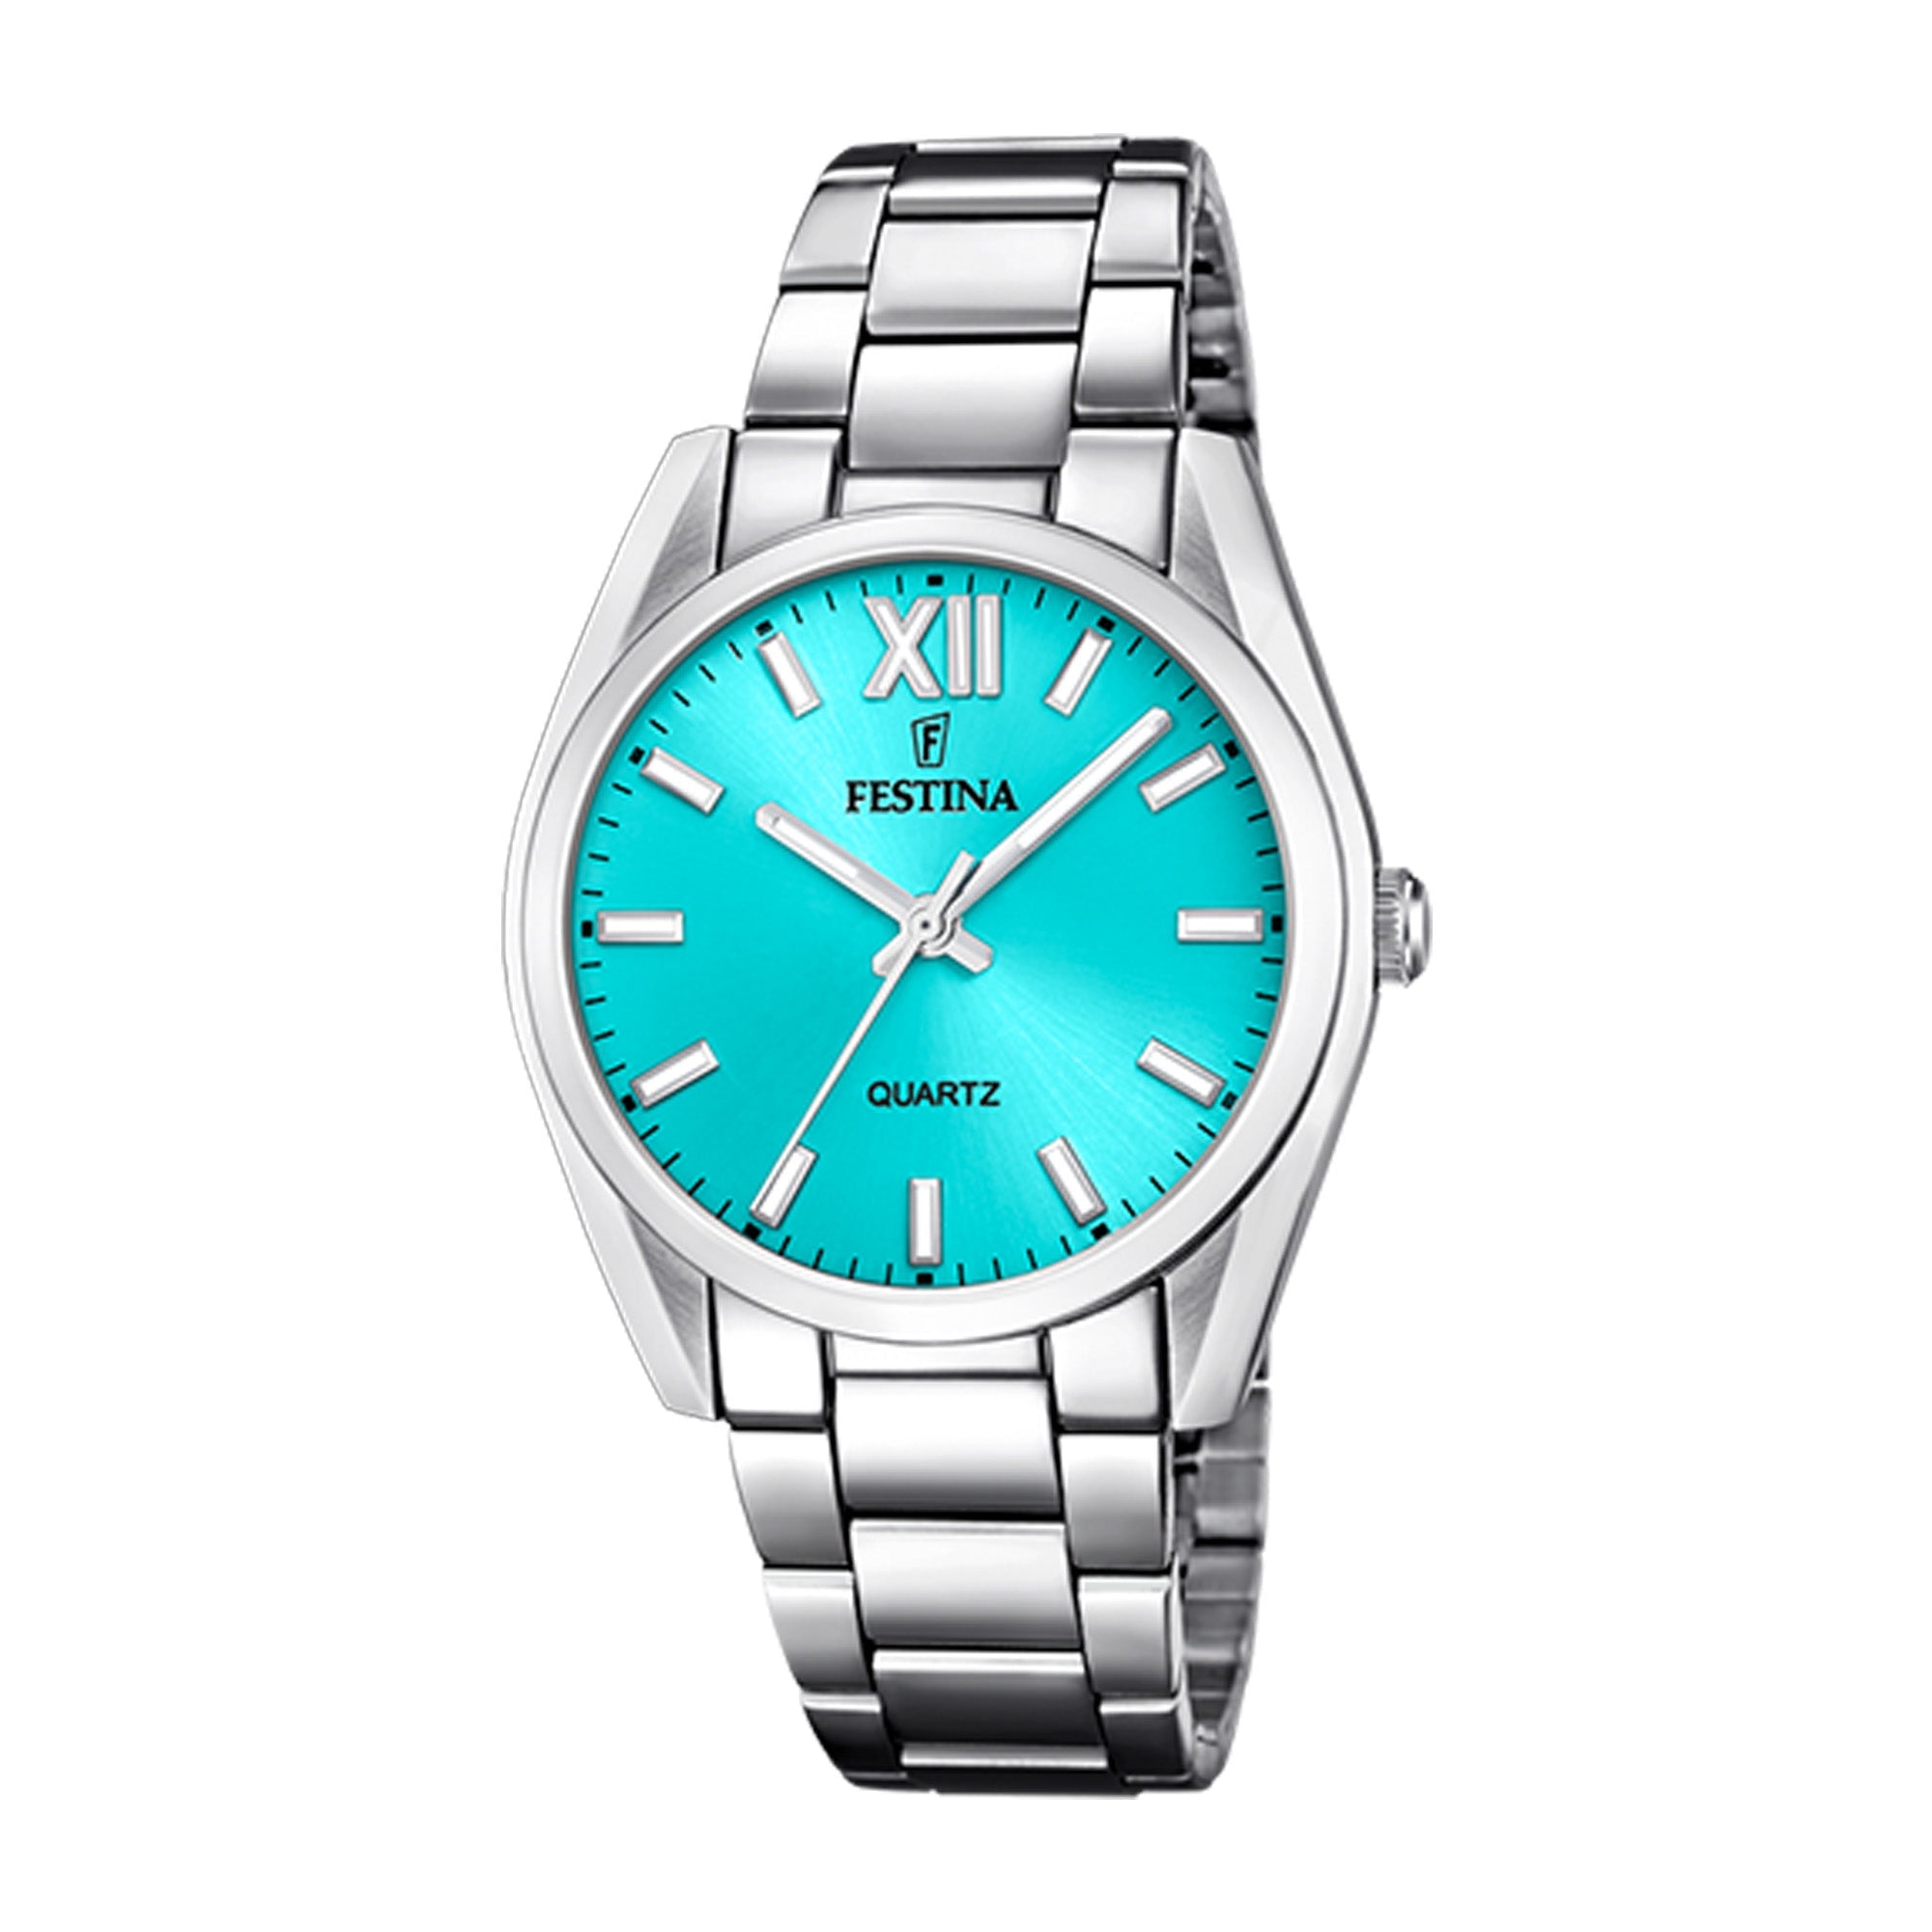 Alegria 36.8mm Light Blue Dial Stainless Steel Watch